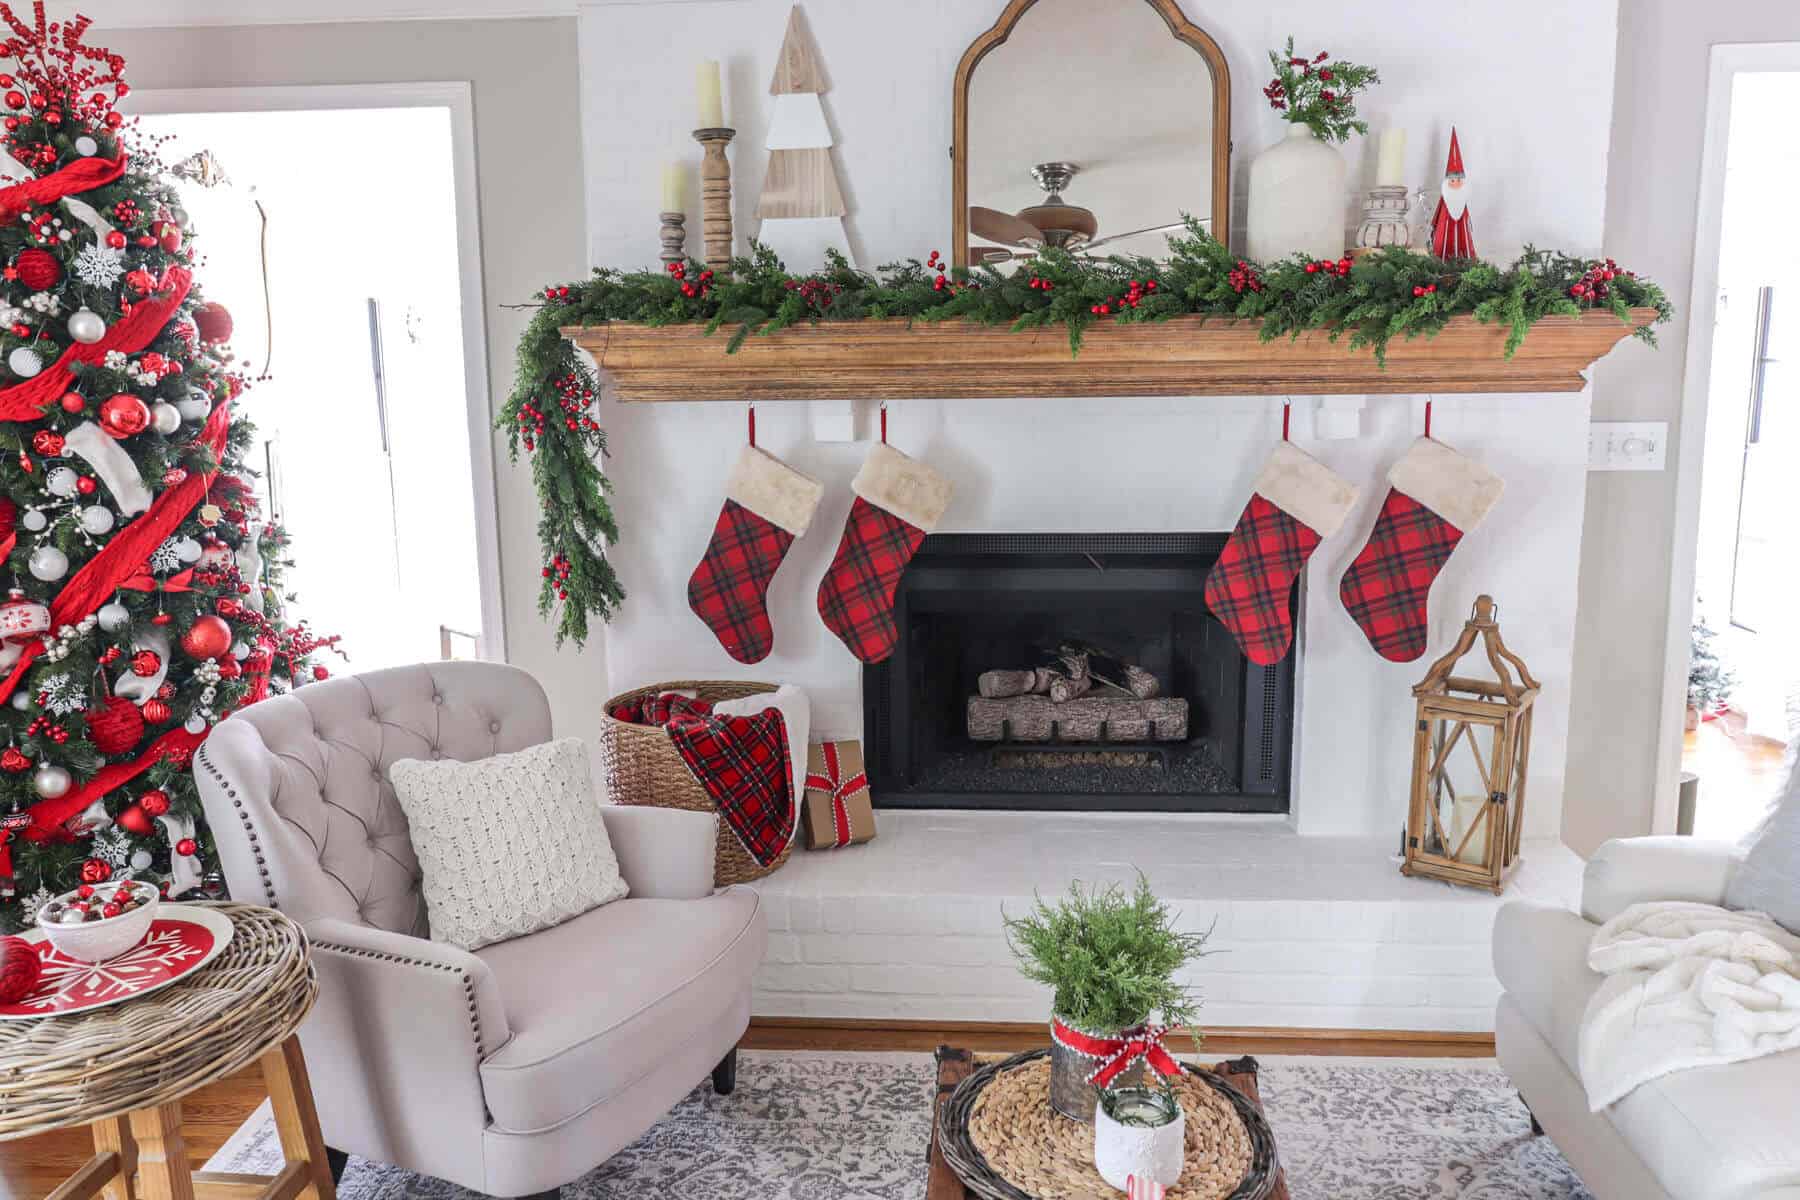 Christmas fireplace mantel decorated with red and white Christmas decorations and tartan plaid stockings